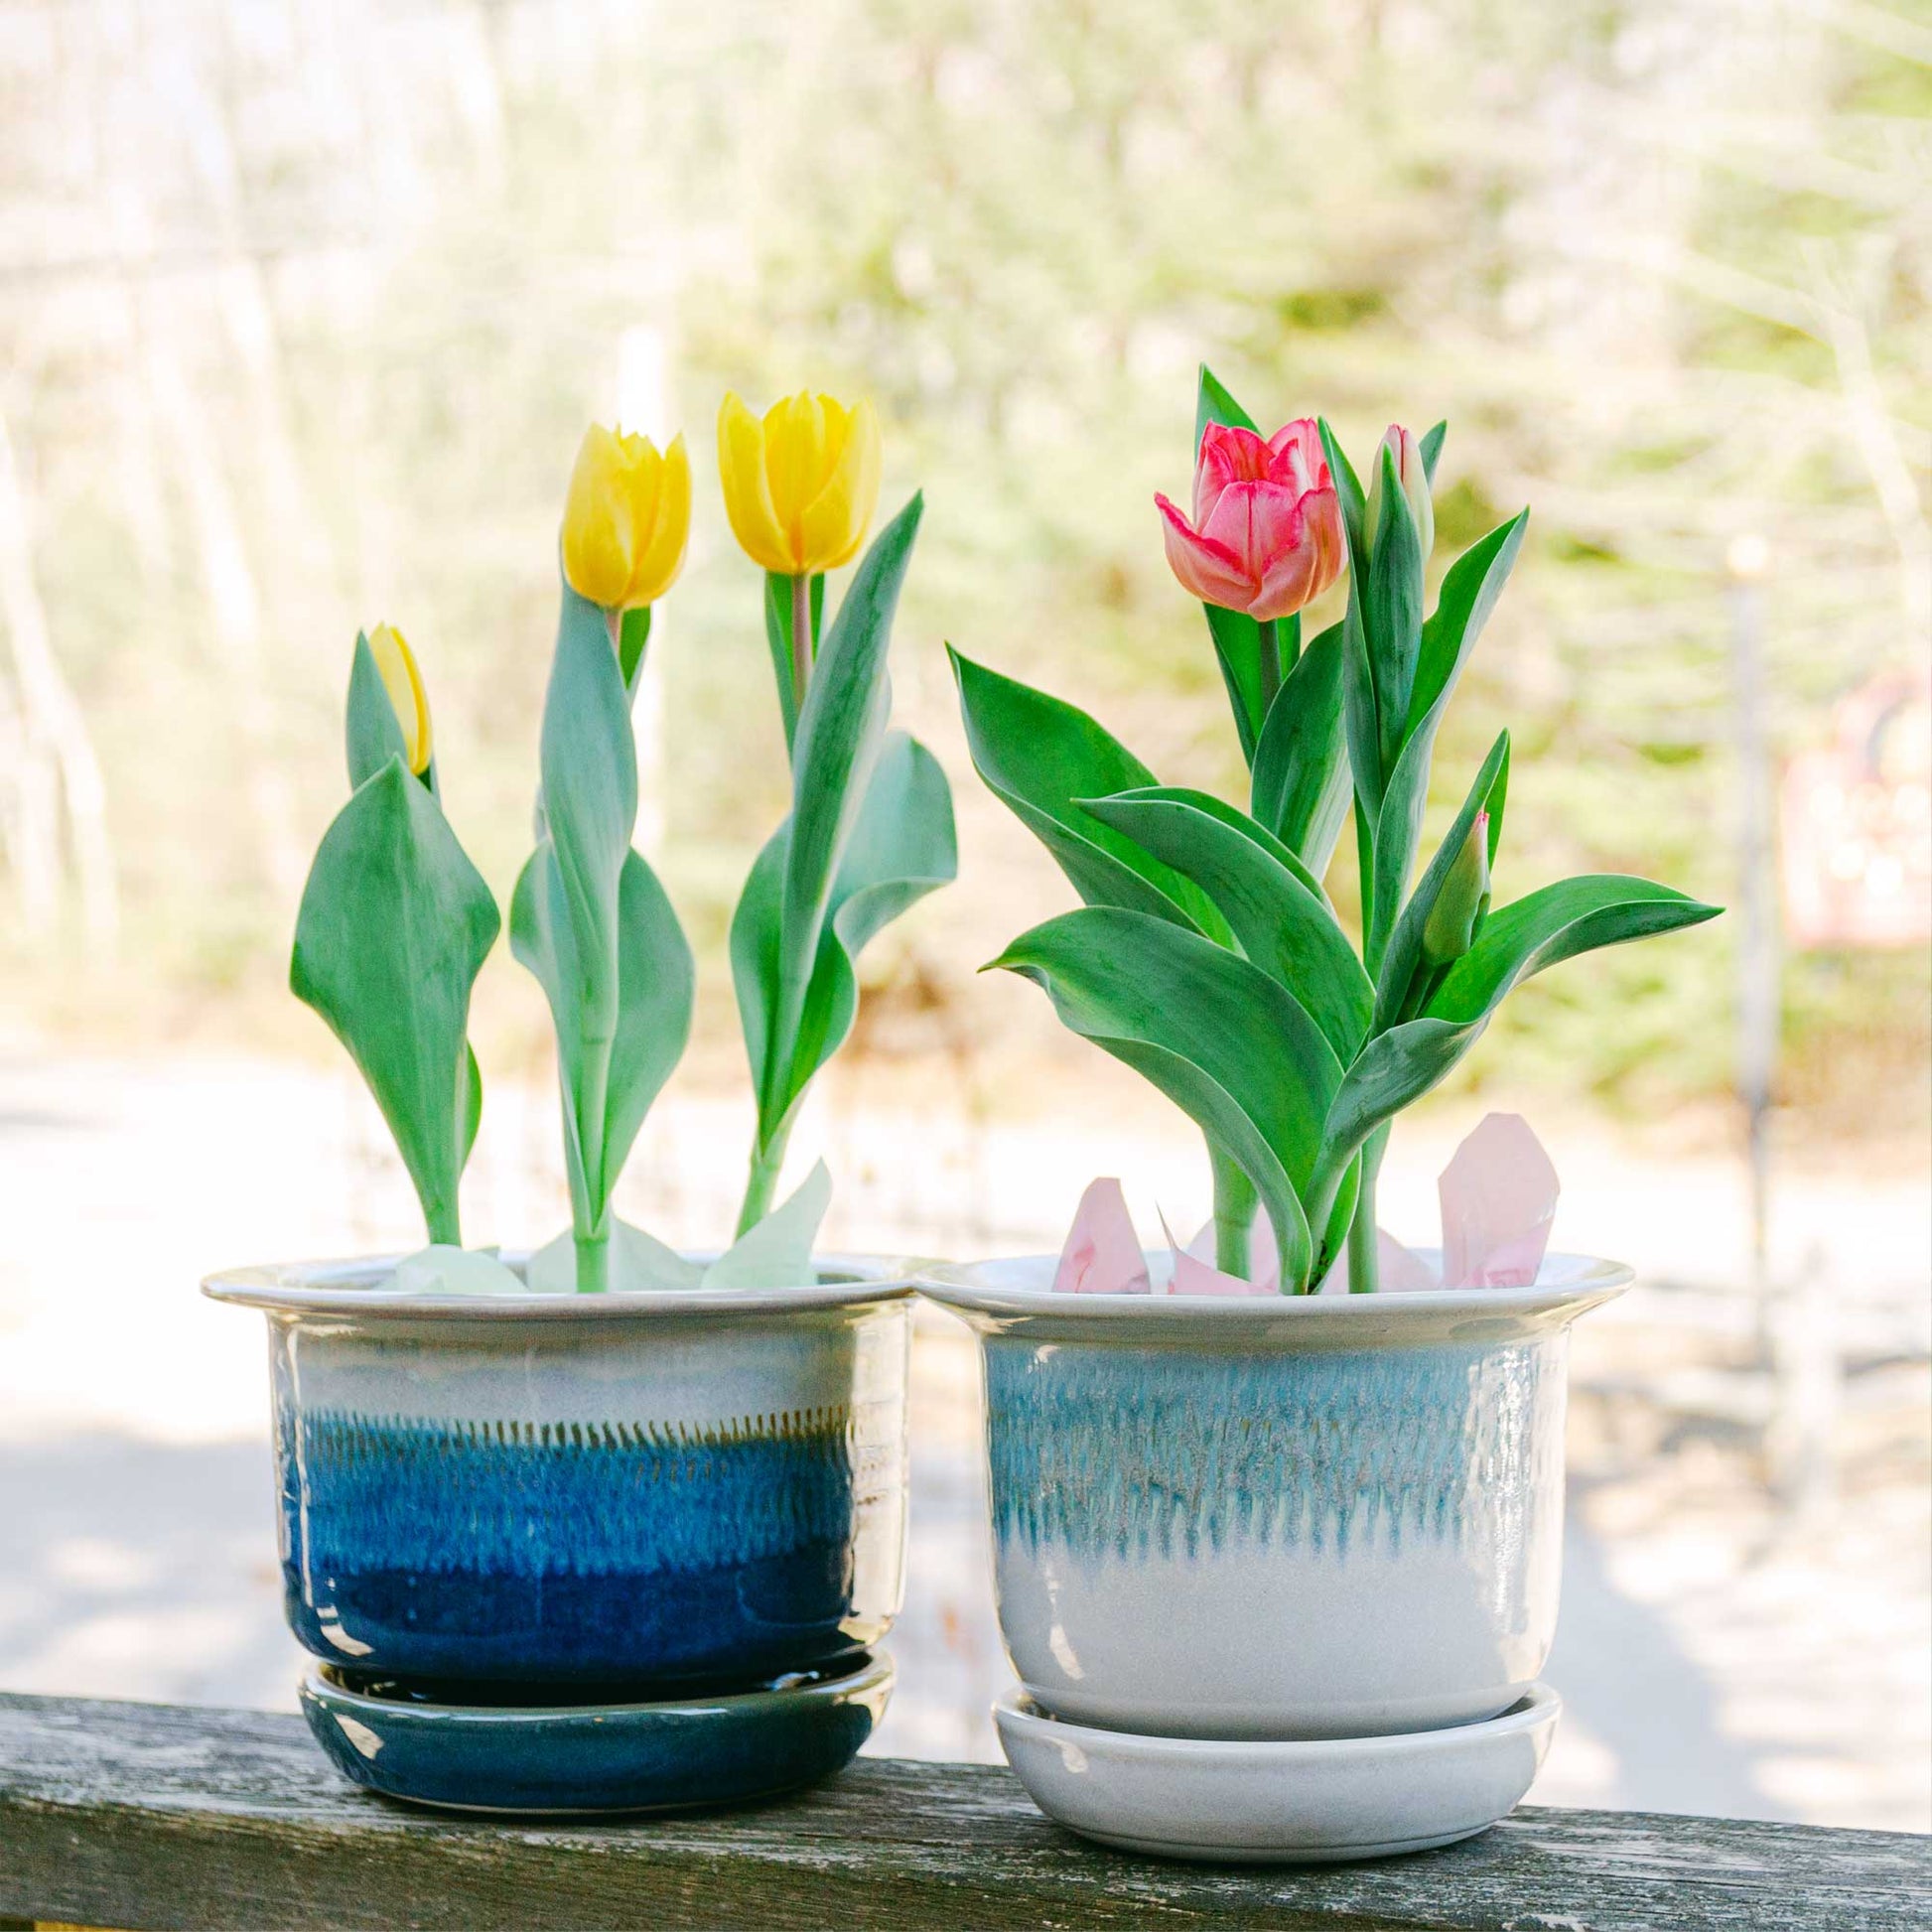 Handmade Pottery Ring Planters made by Georgetown Pottery in Maine